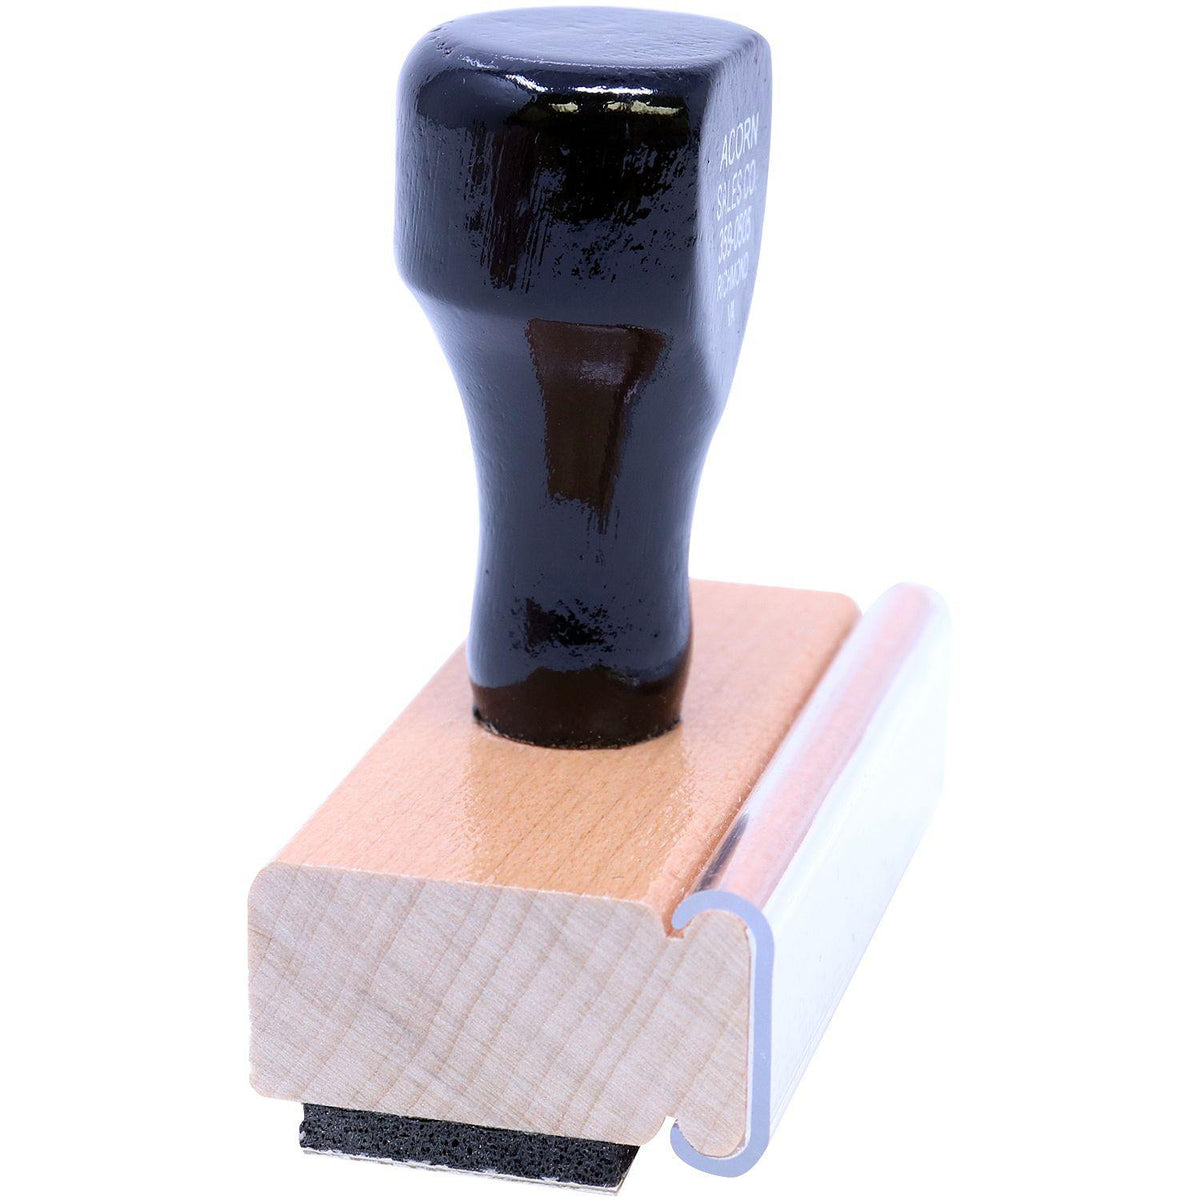 Side View of Large Expert Witness Rubber Stamp at an Angle